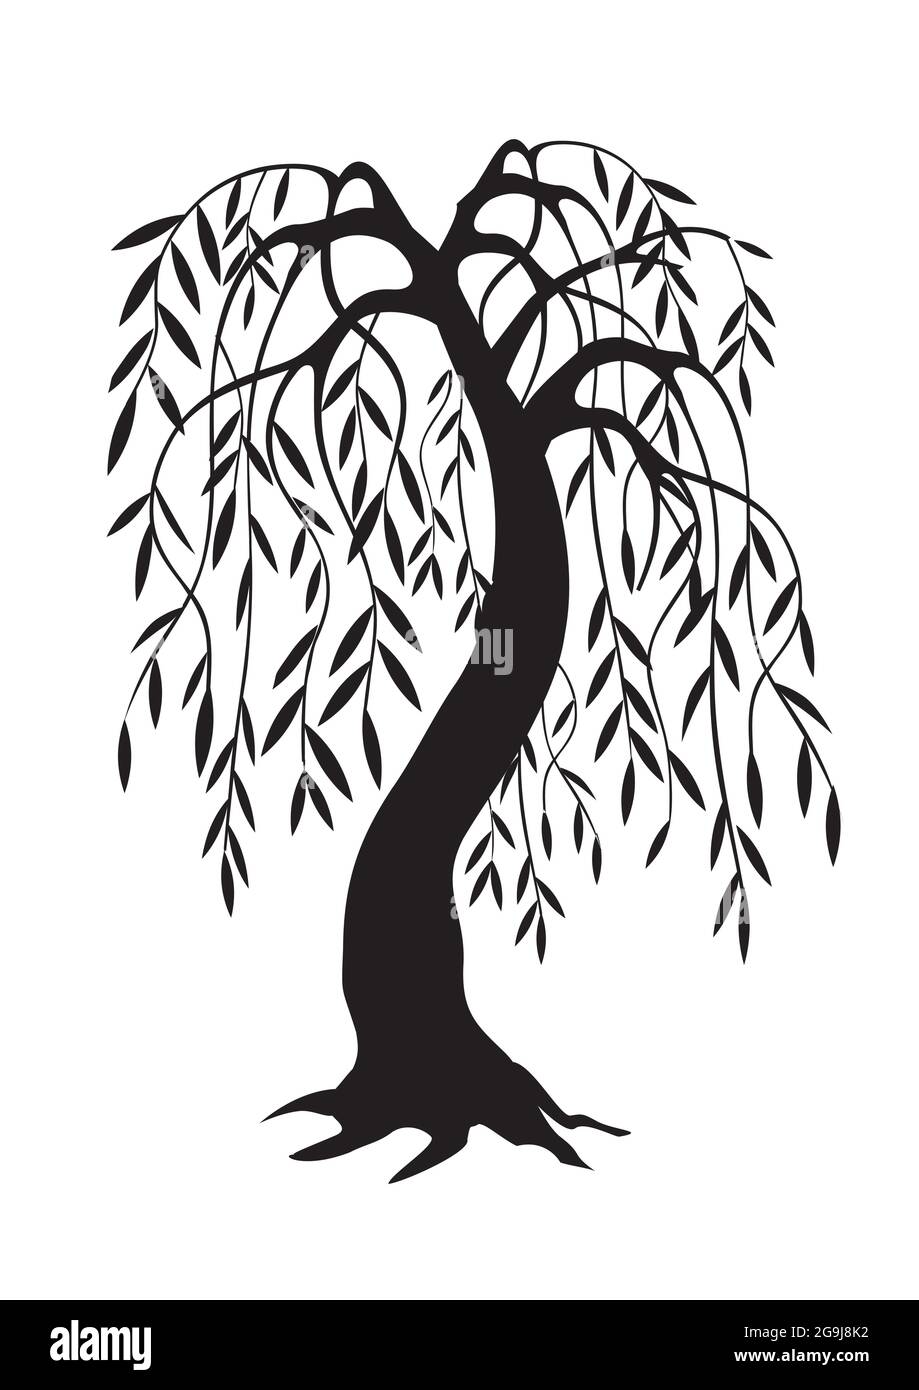 Weeping Willow tree, black silhouette. Illustration of melancholy tree motive. Isolated on white background. Vector available. Stock Vector